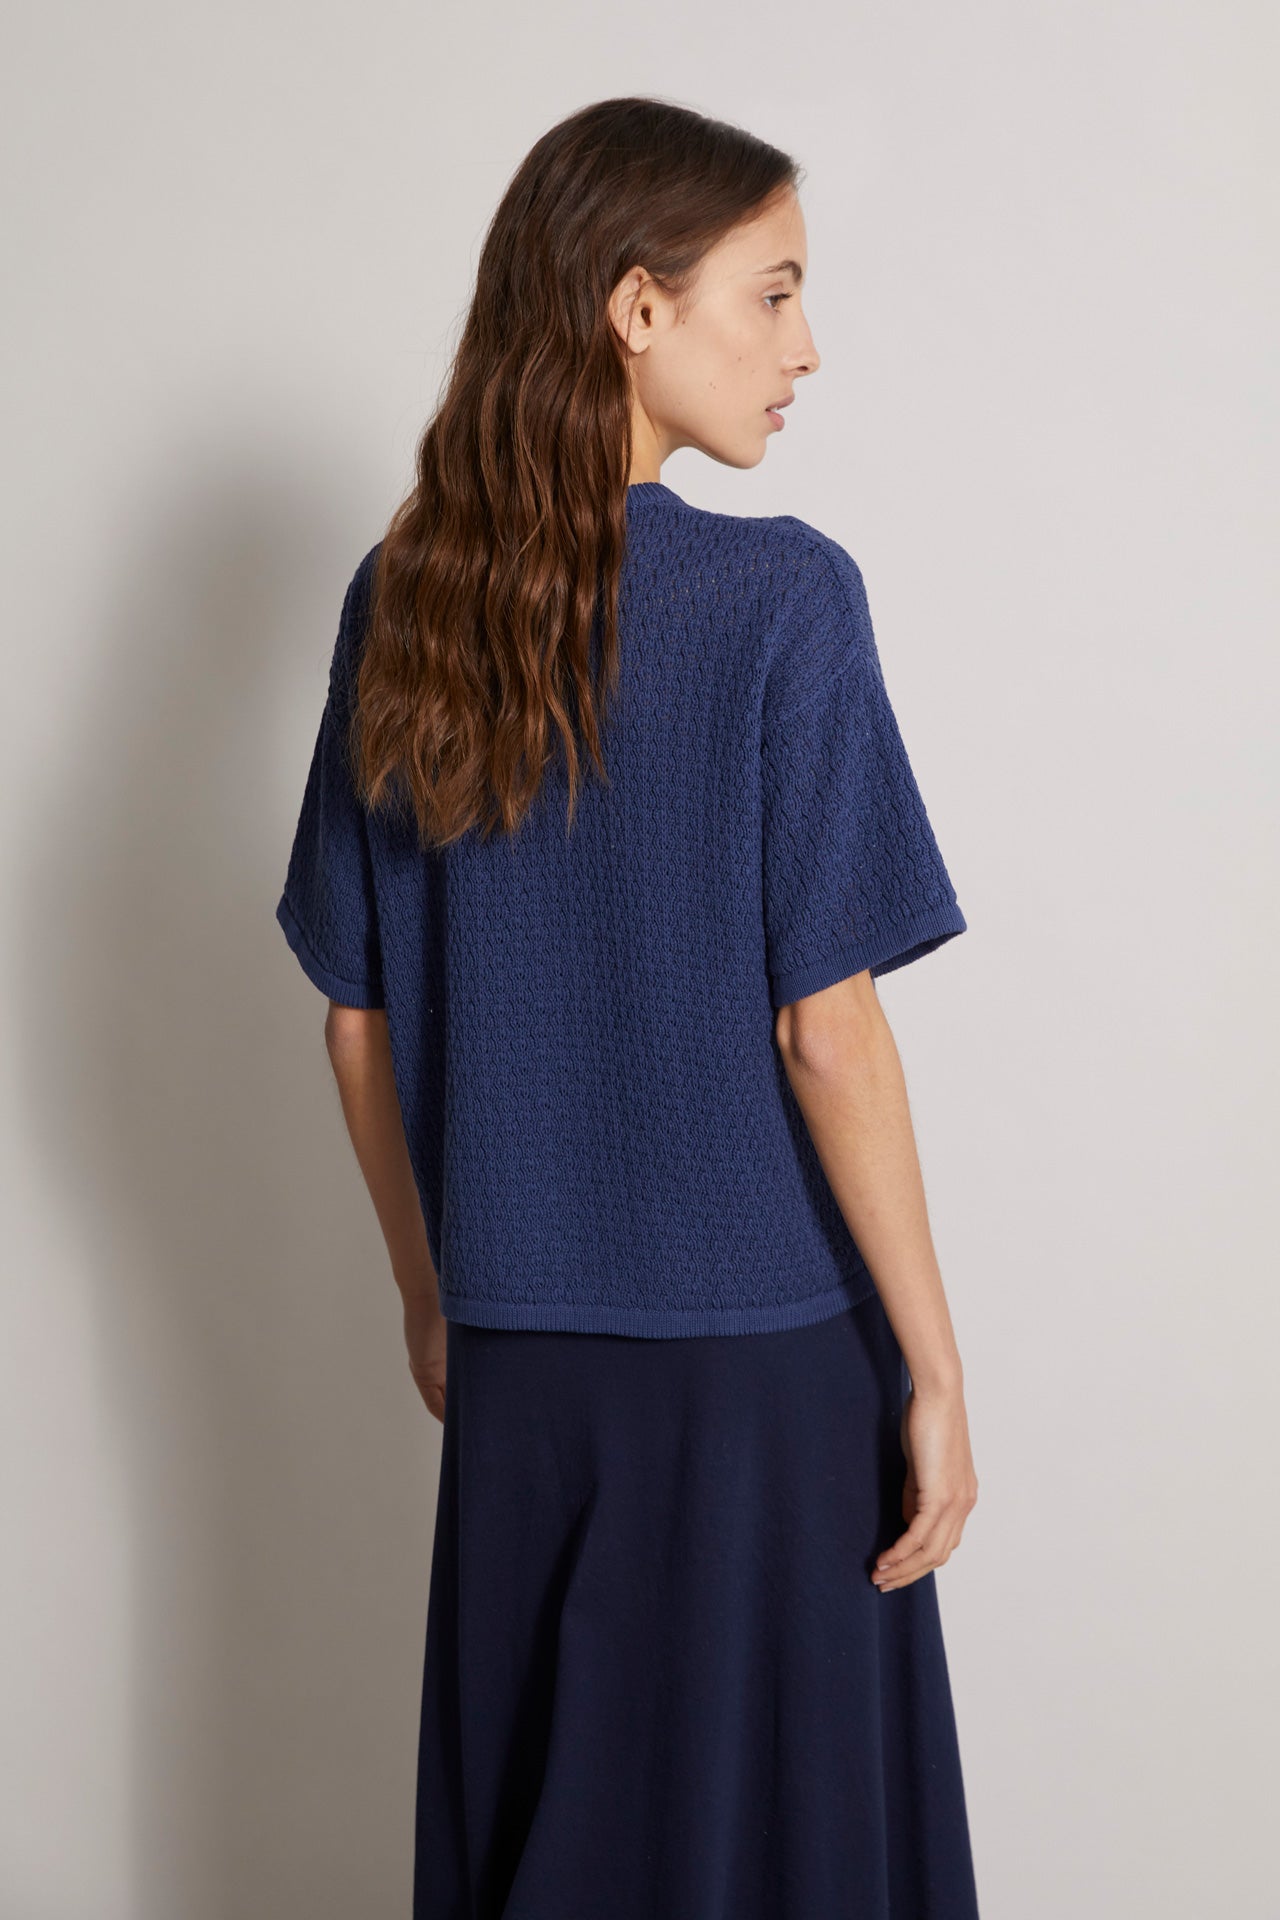 Racale knitted t-shirt in cotton linen blend